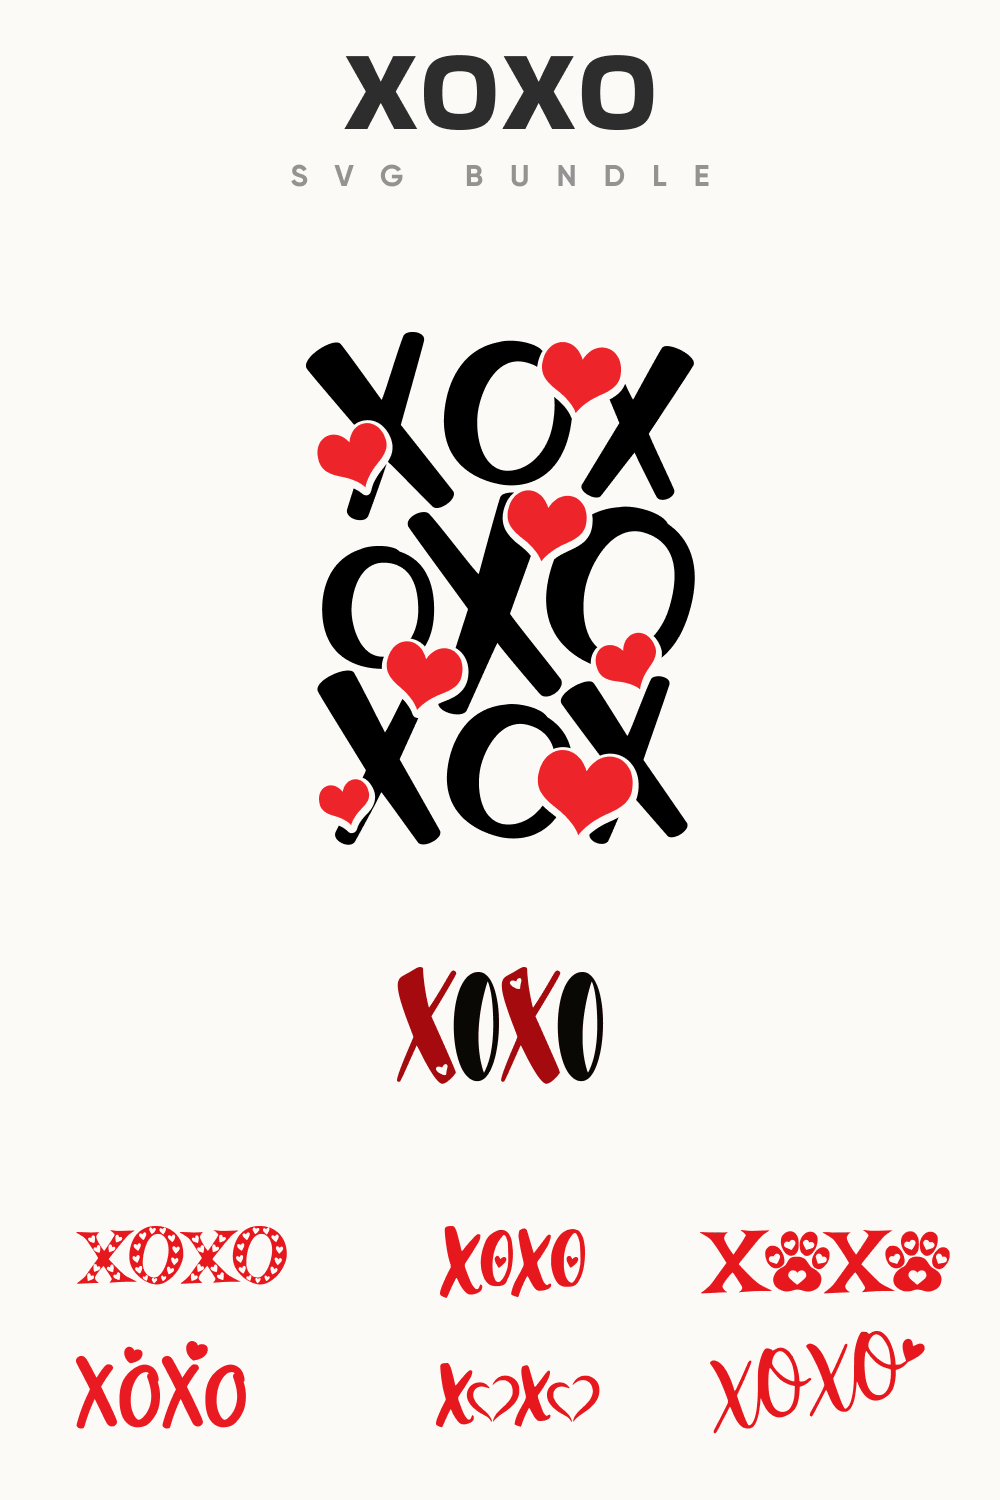 Black and red font with xoxo.